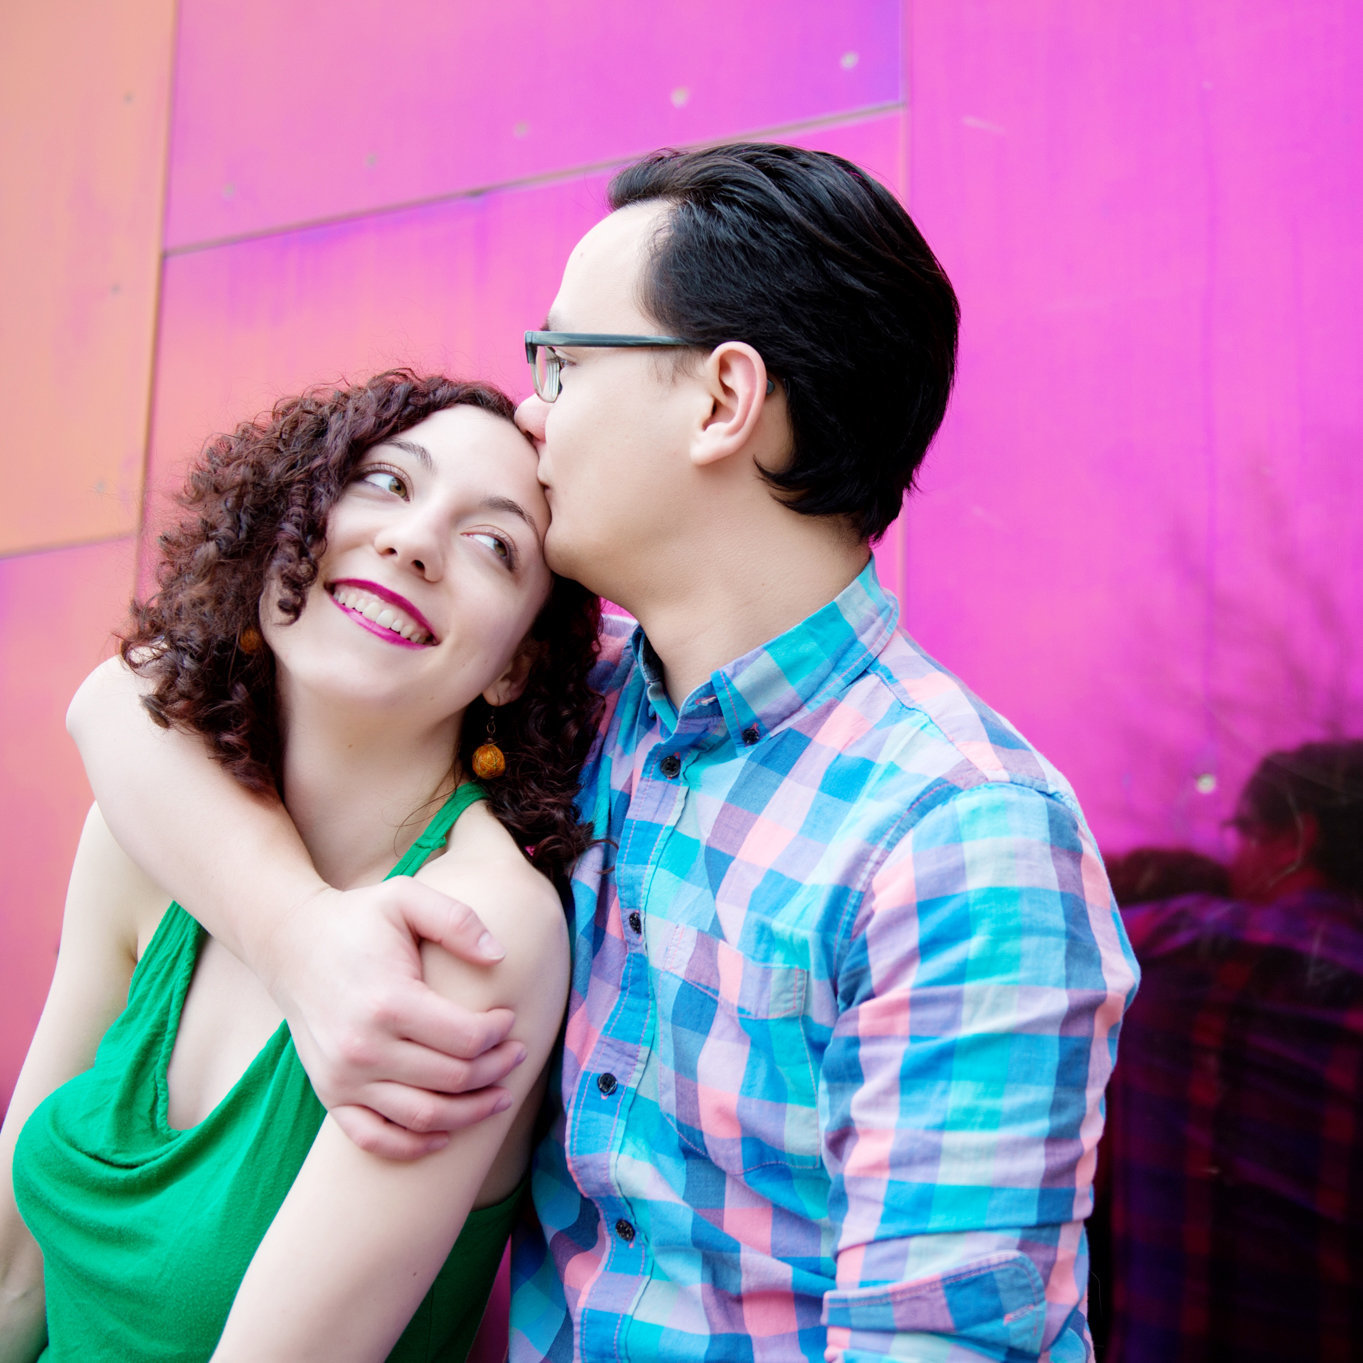 a man kisses a woman's forehead in front of a bright pink shiny wall